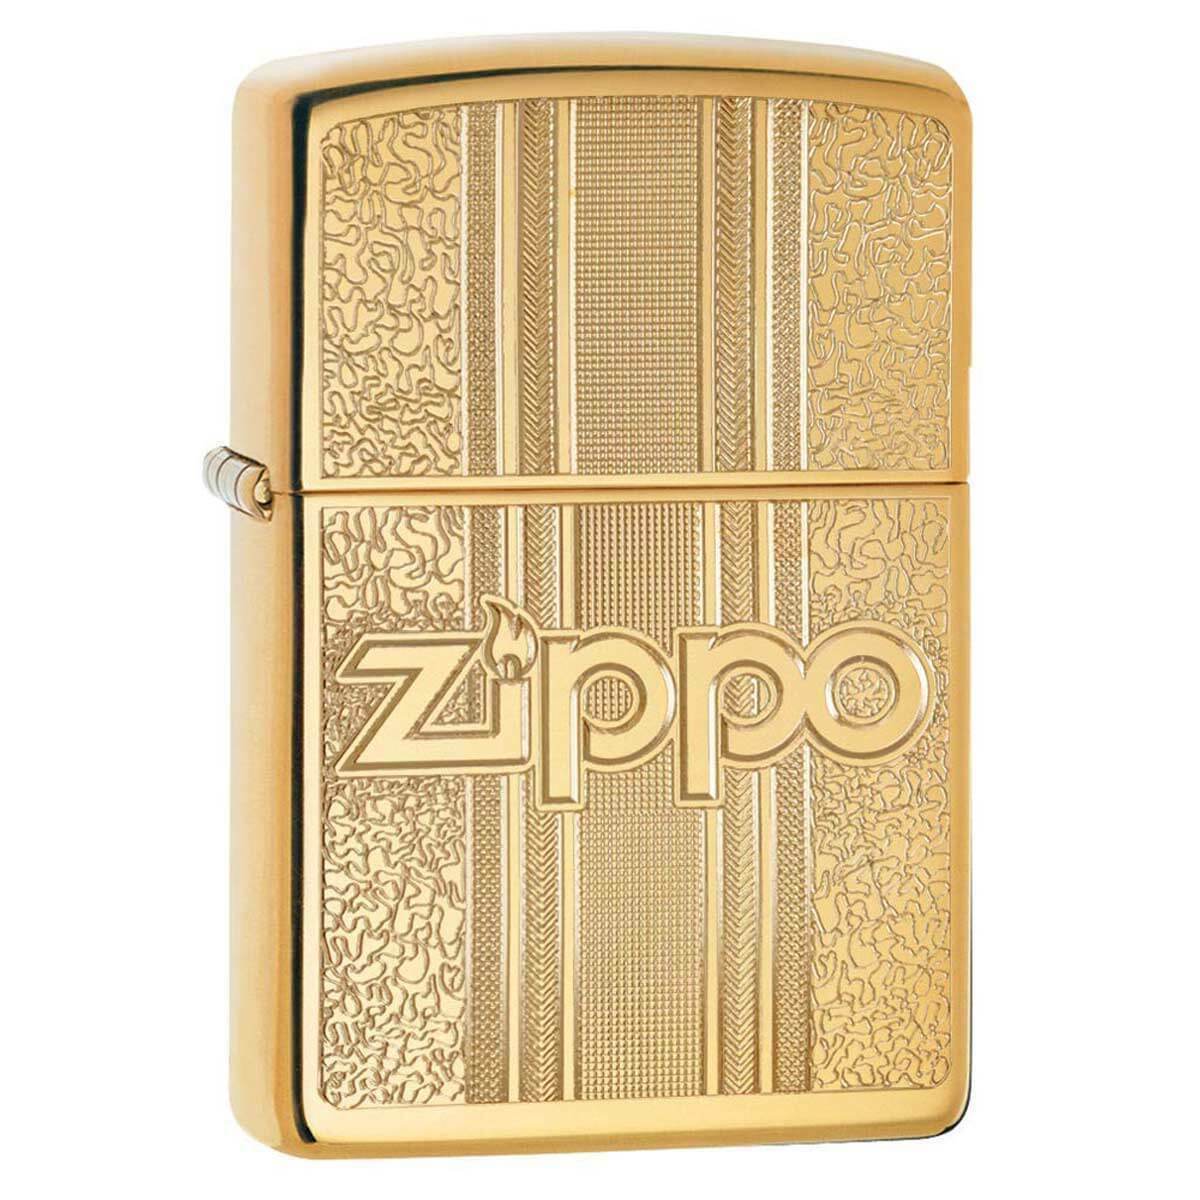 Zippo Windproof Lighter Classic Zippo Logo with Pattern Design Engraved (29677)